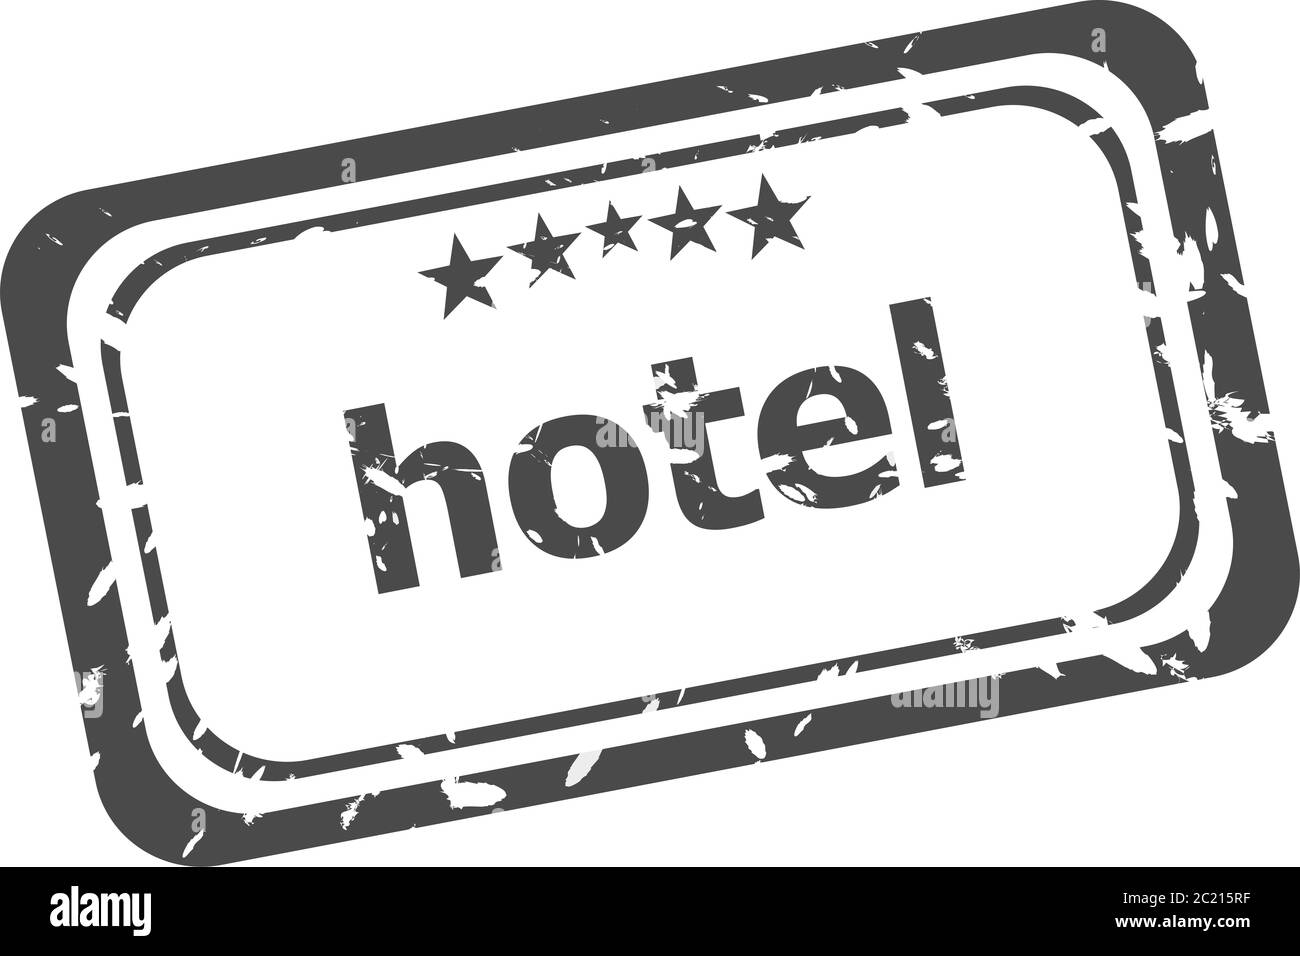 hotel grunge rubber stamp isolated on white background Stock Photo